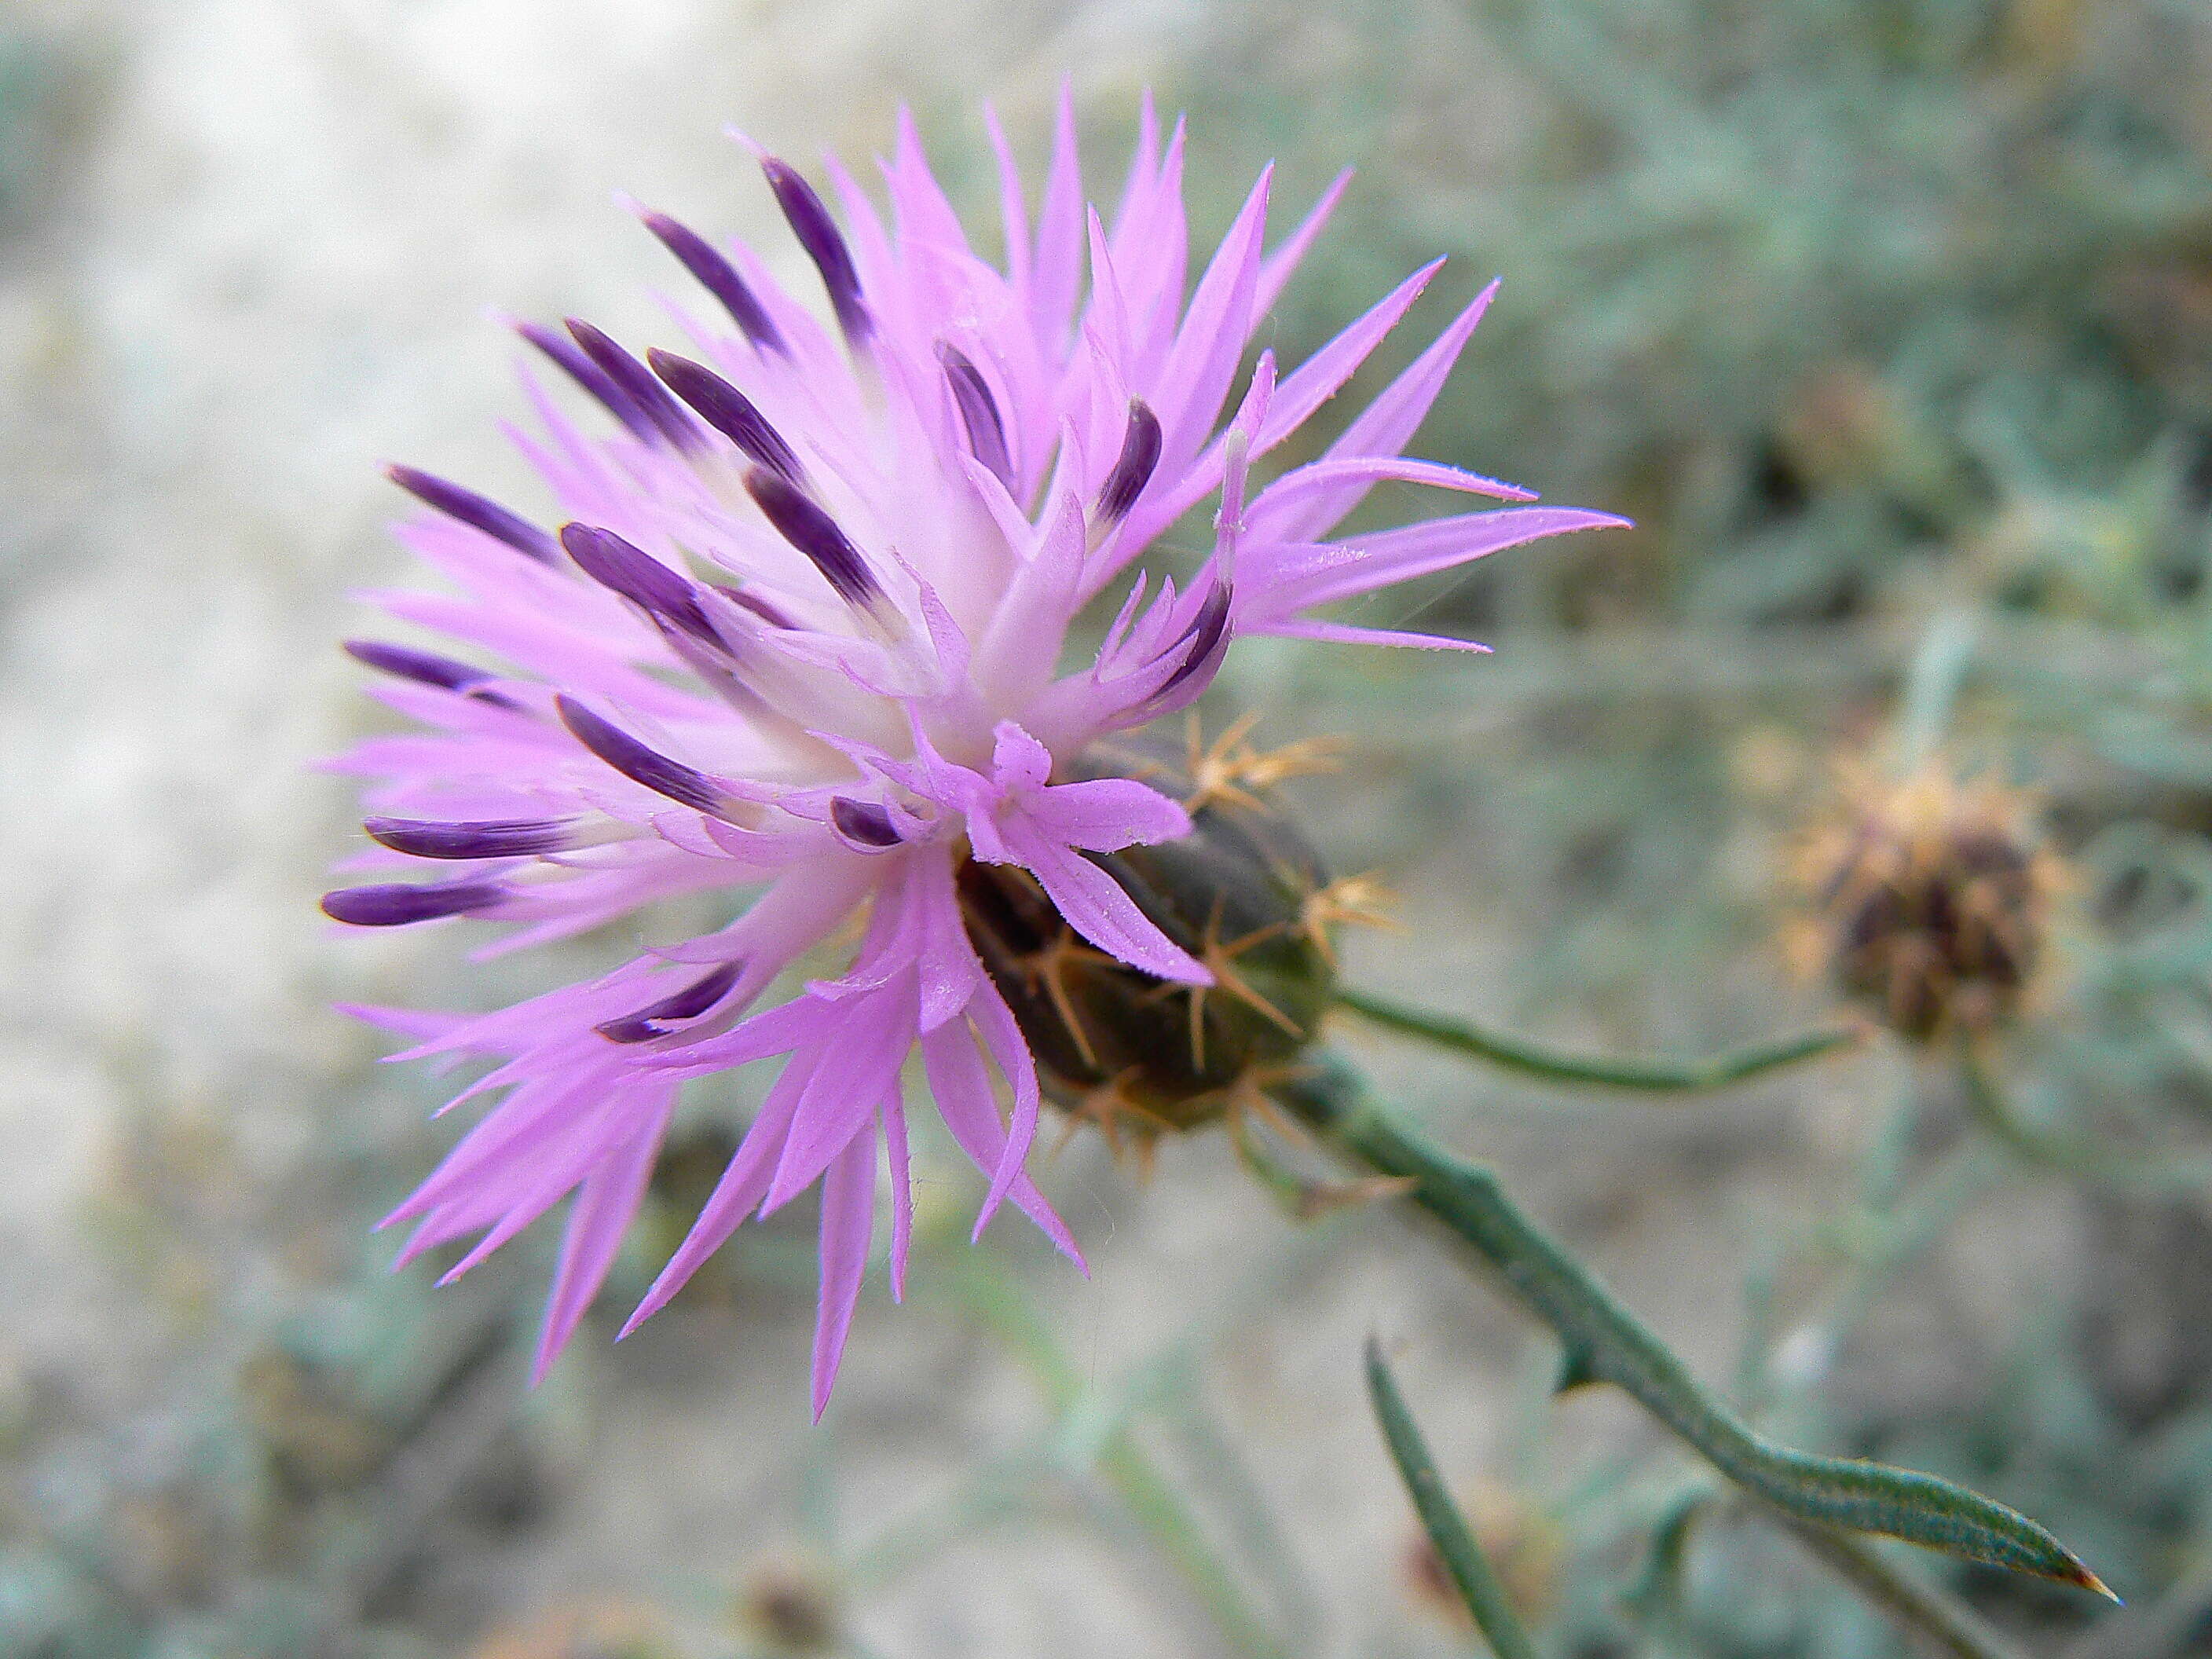 Image of rough star-thistle